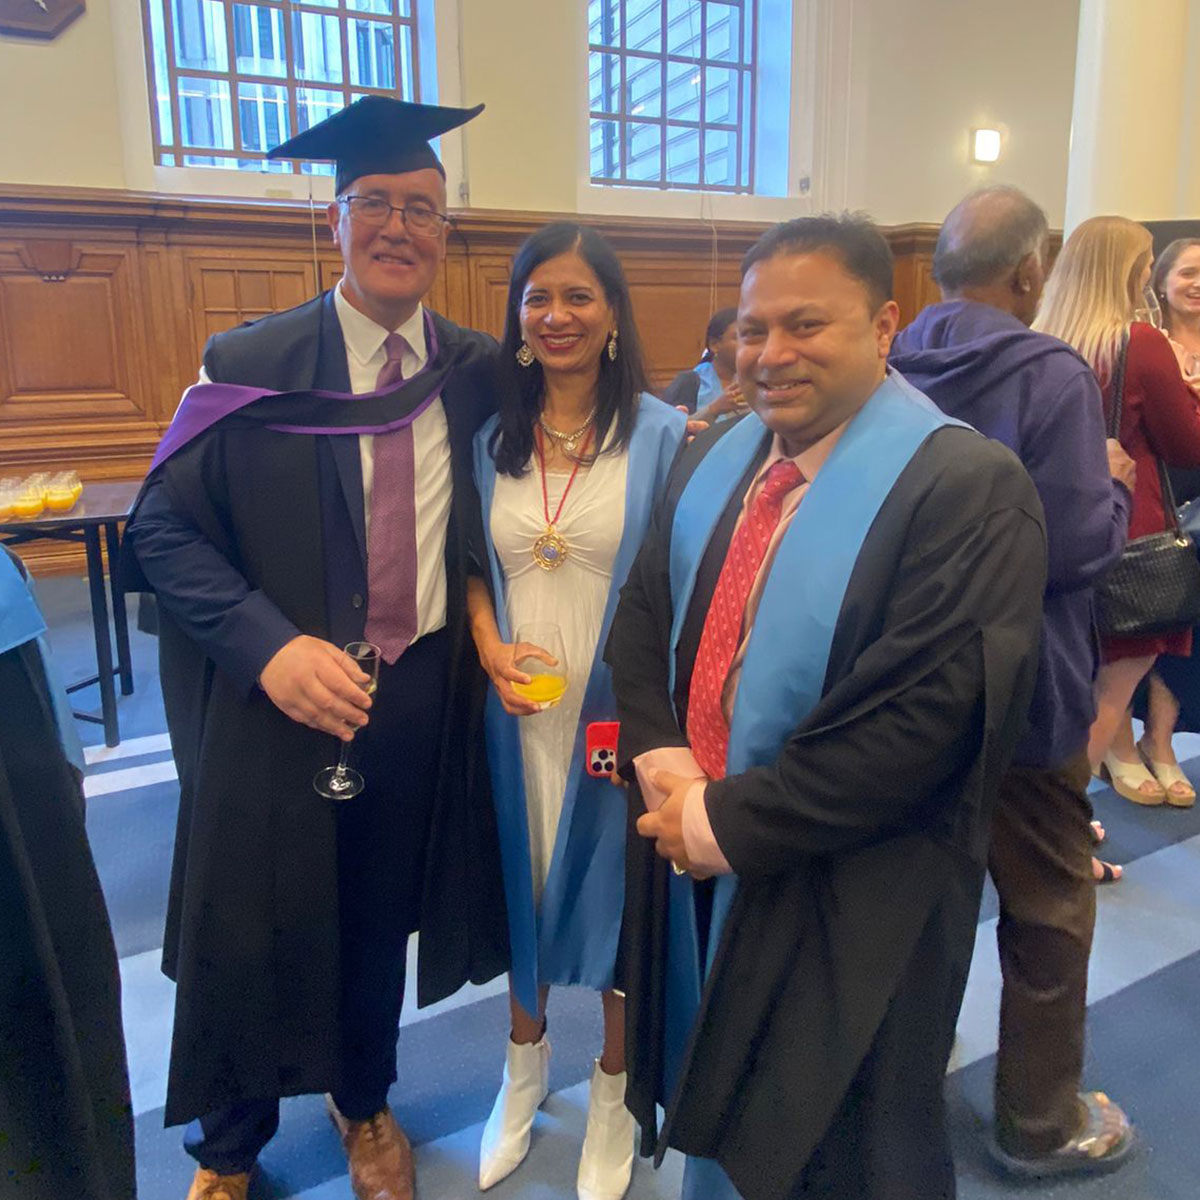 Dr. Saptarshi Ghosh was honored with the prestigious Fellow of Royal College of Radiology (Clinical Oncology) in London on September 15th, 2023